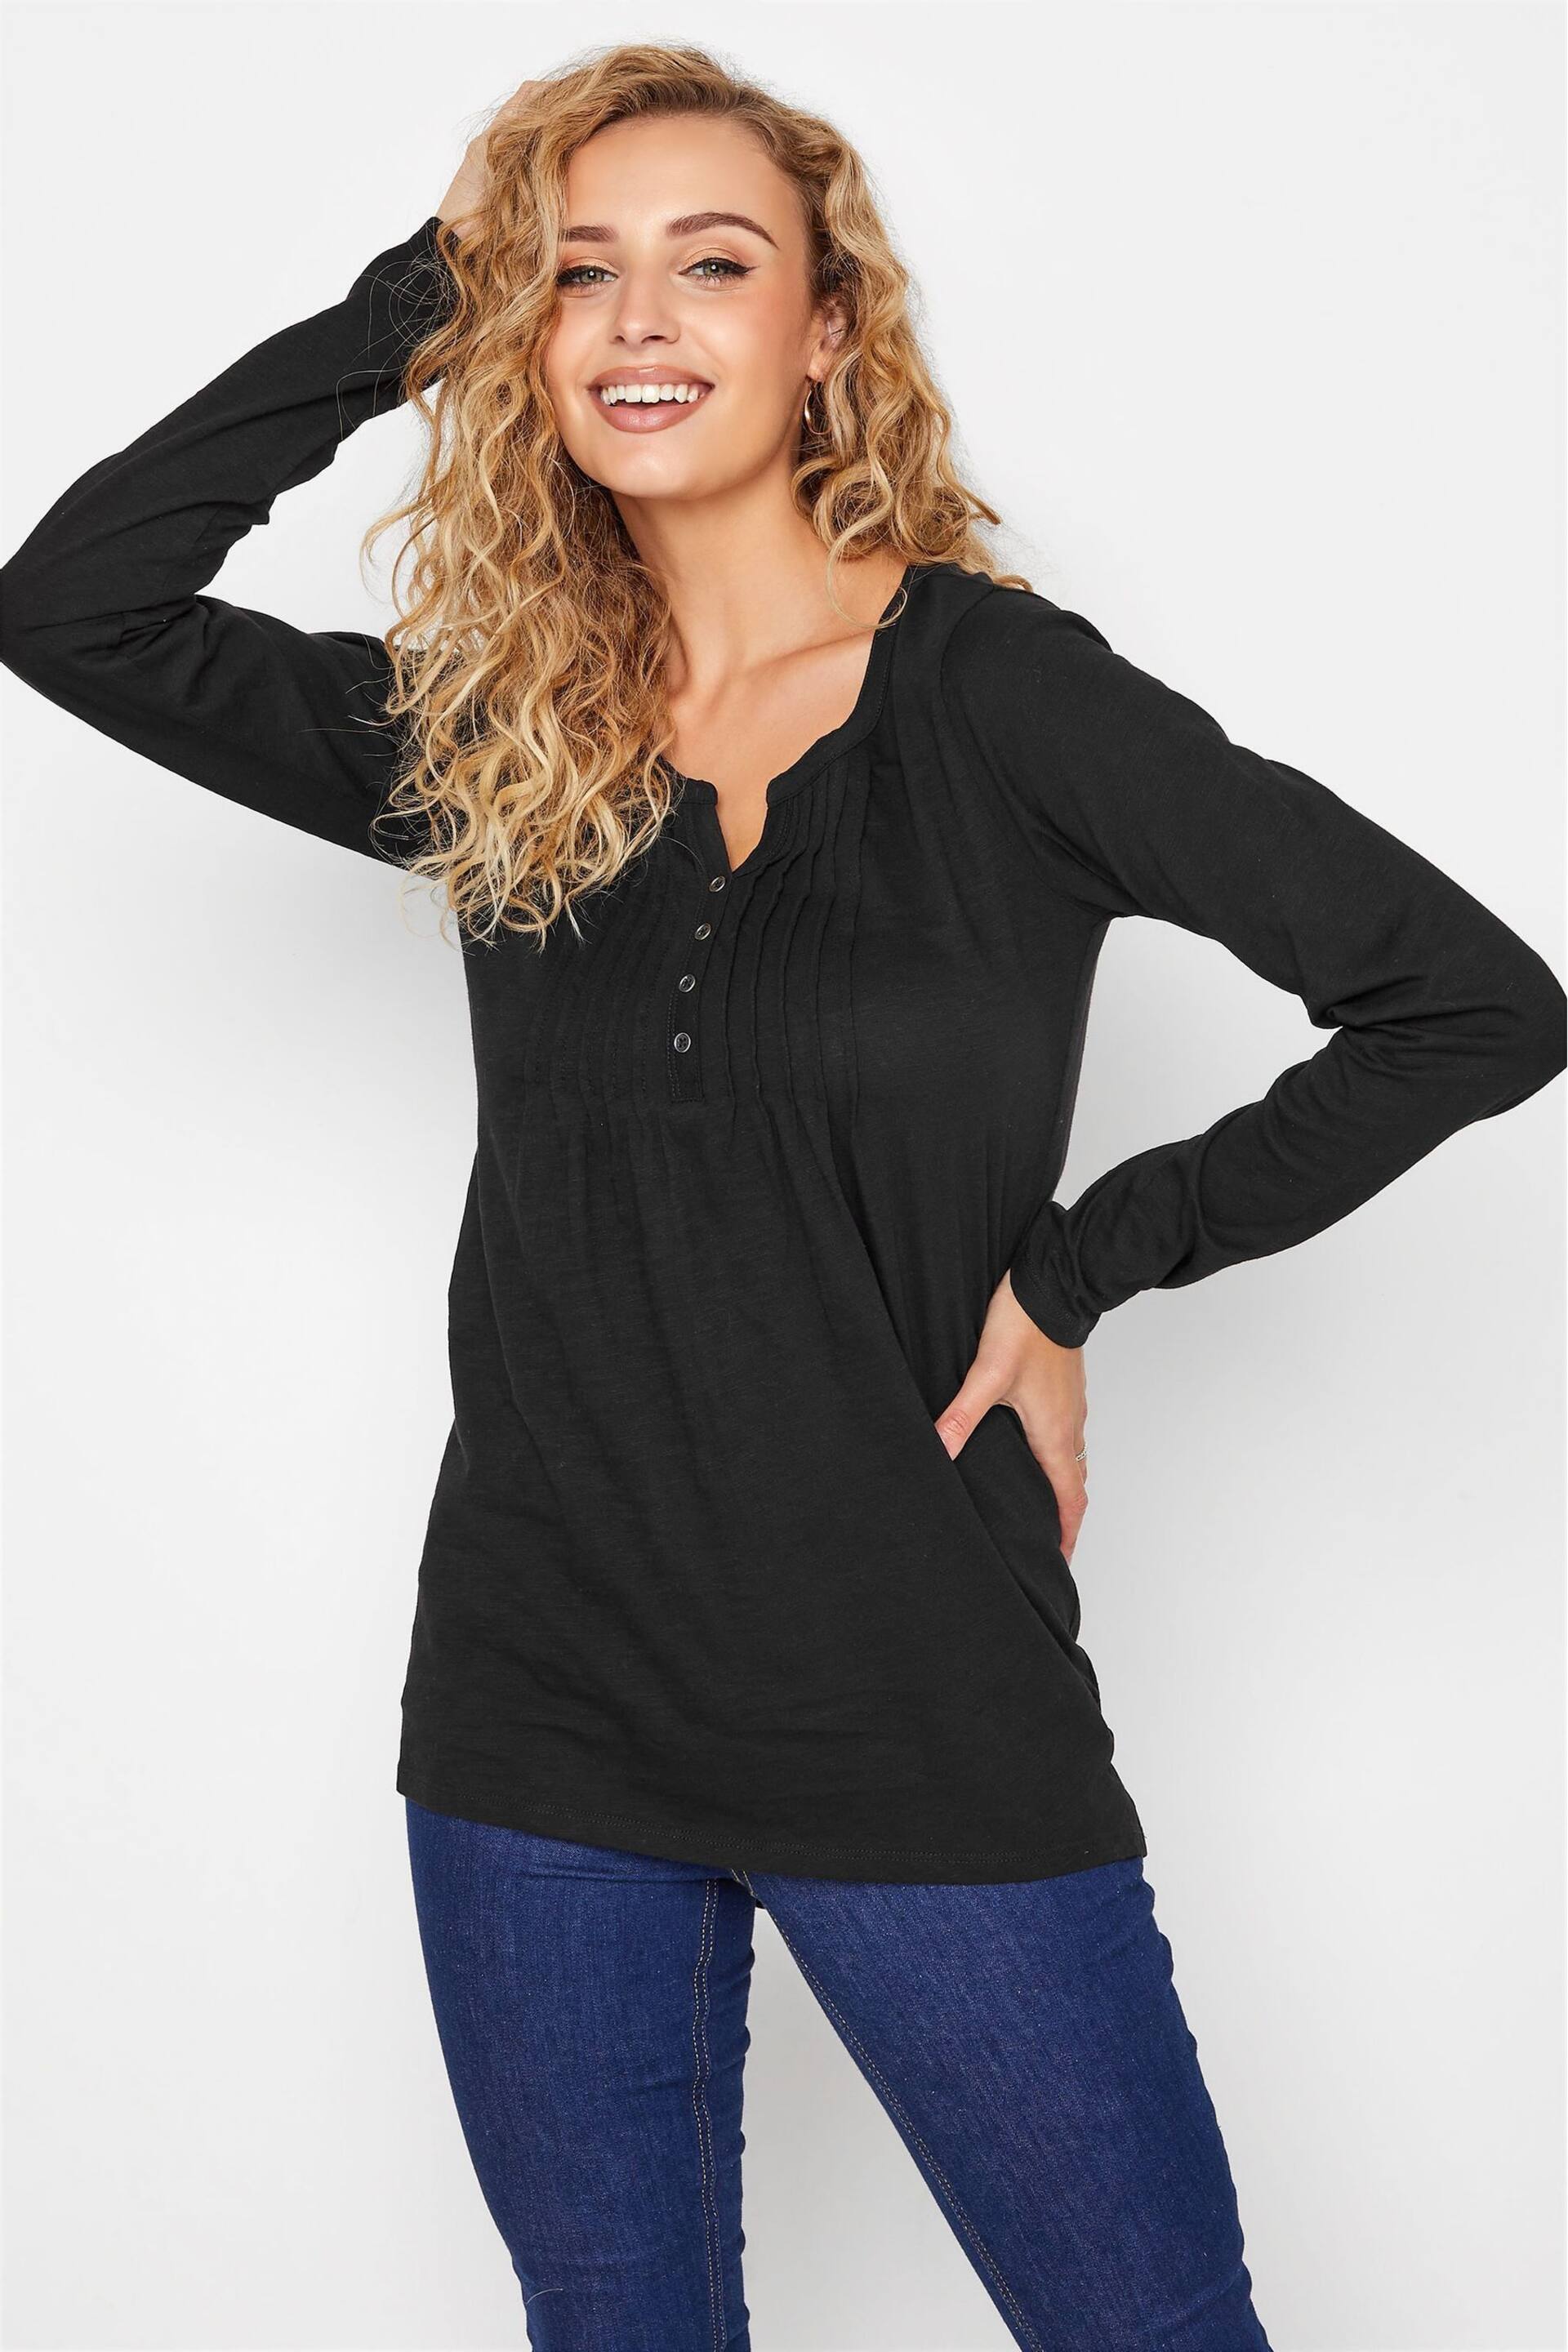 Long Tall Sally Black Henley Top - Image 5 of 7